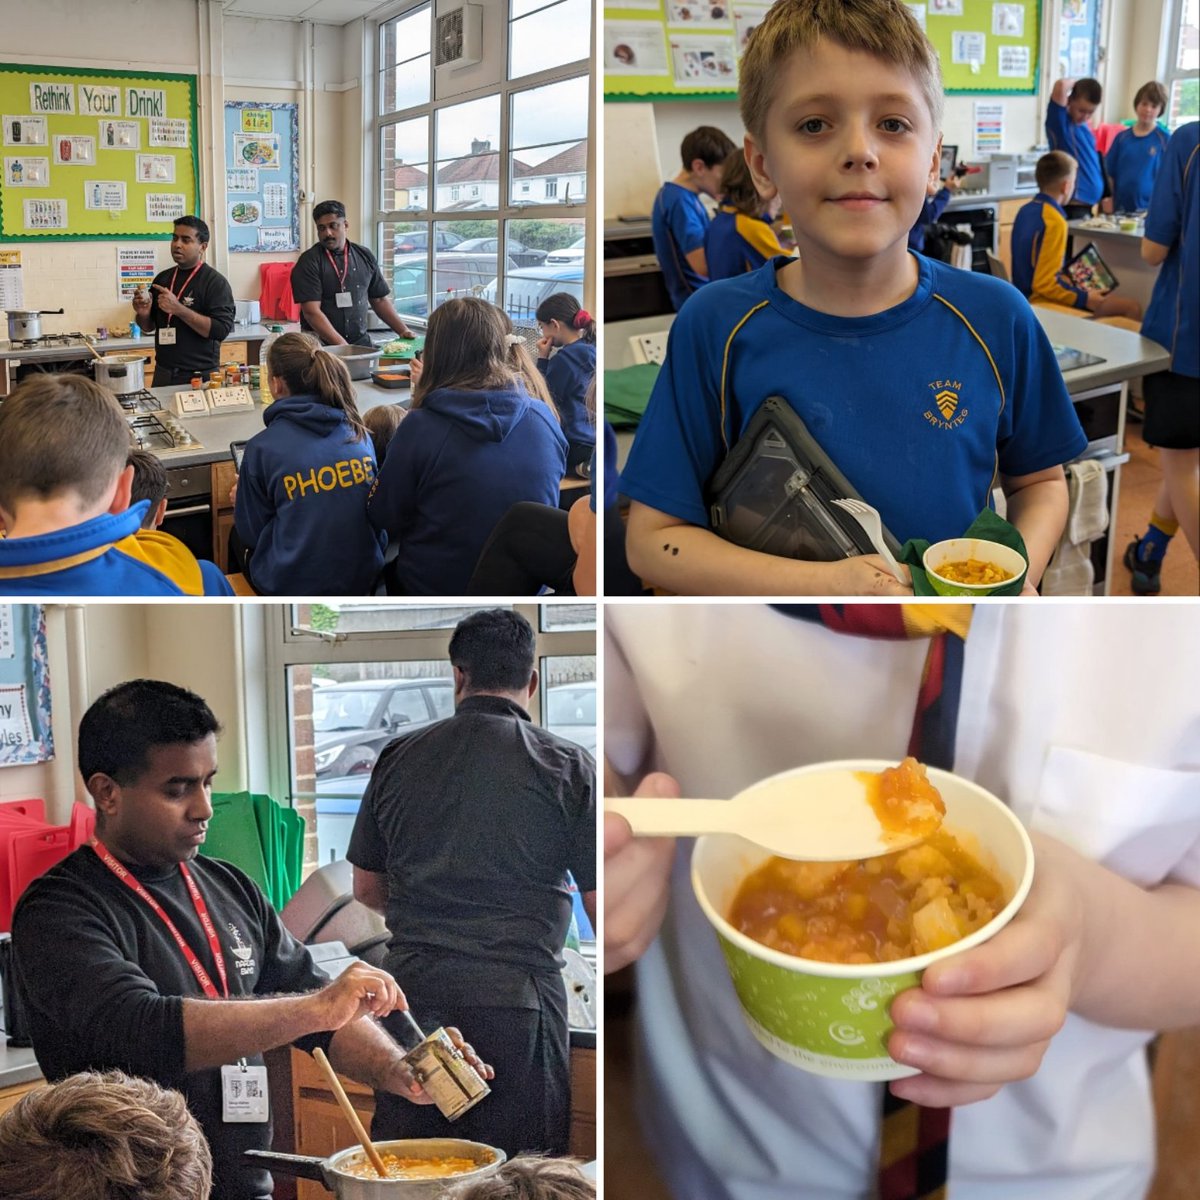 On Wednesday, our Year 7 Dyfodol class enjoyed a cooking masterclass led by George from the Brewery Fields Street Food restaurant. Pupils thoroughly enjoyed learning how to cook a healthy curry dish from scratch #DyfodolExpeditionDay